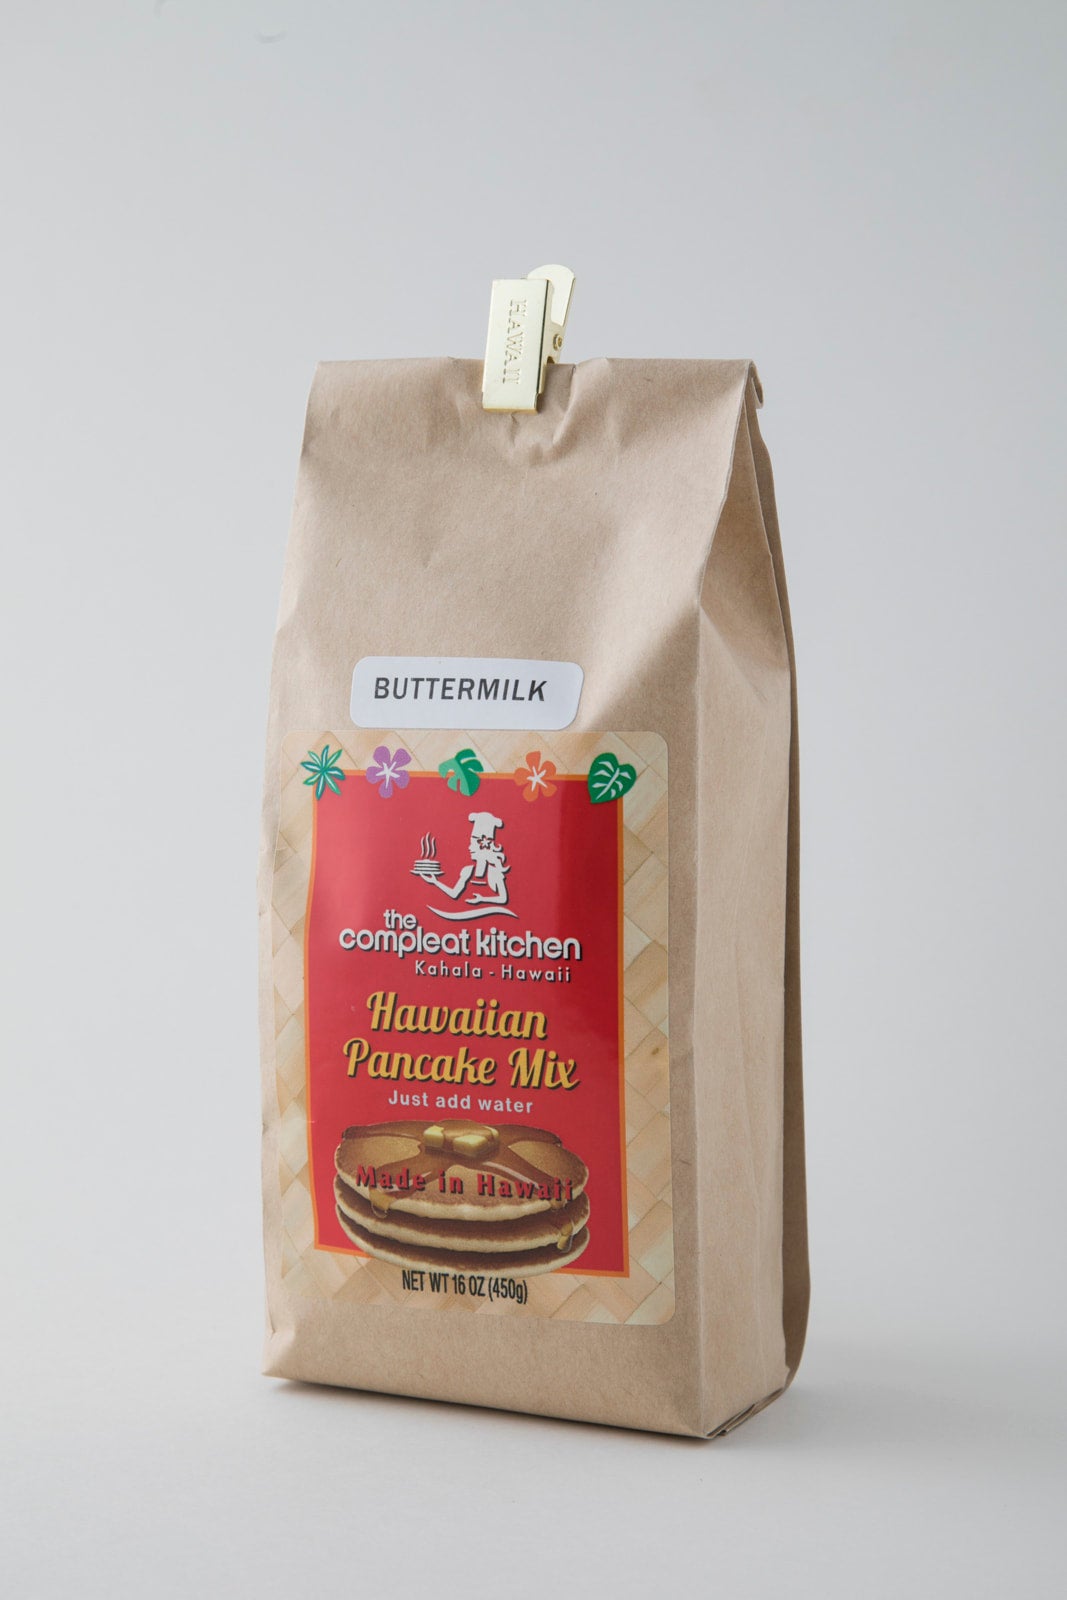 The Compleat Kitchen Pancake Mix - 16 oz. (5 Flavors) - Made in Hawai'i